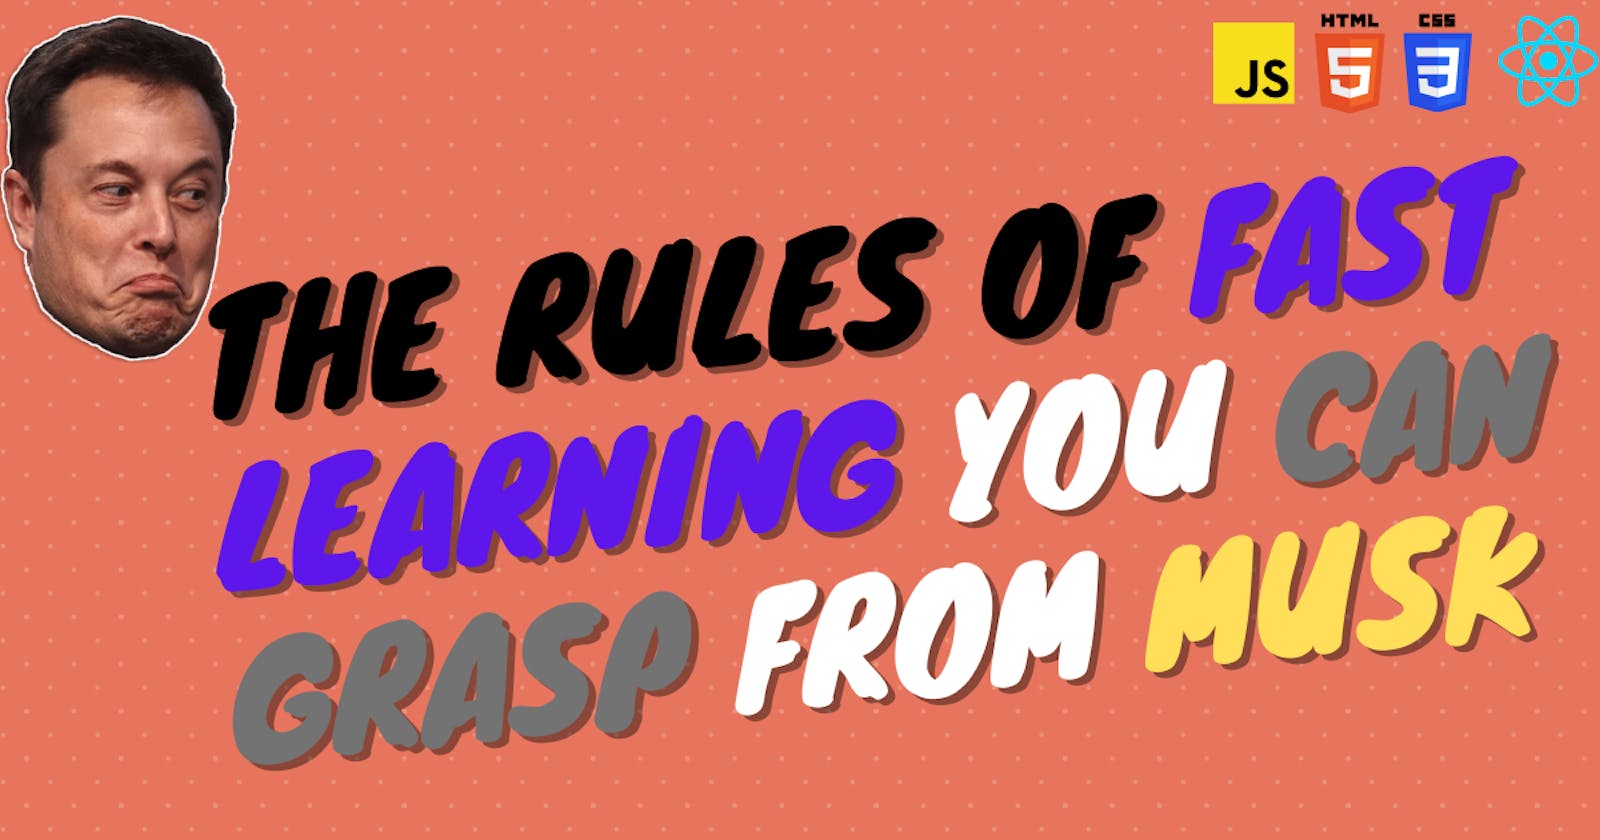 The Rules of fast learning you can grasp from Musk